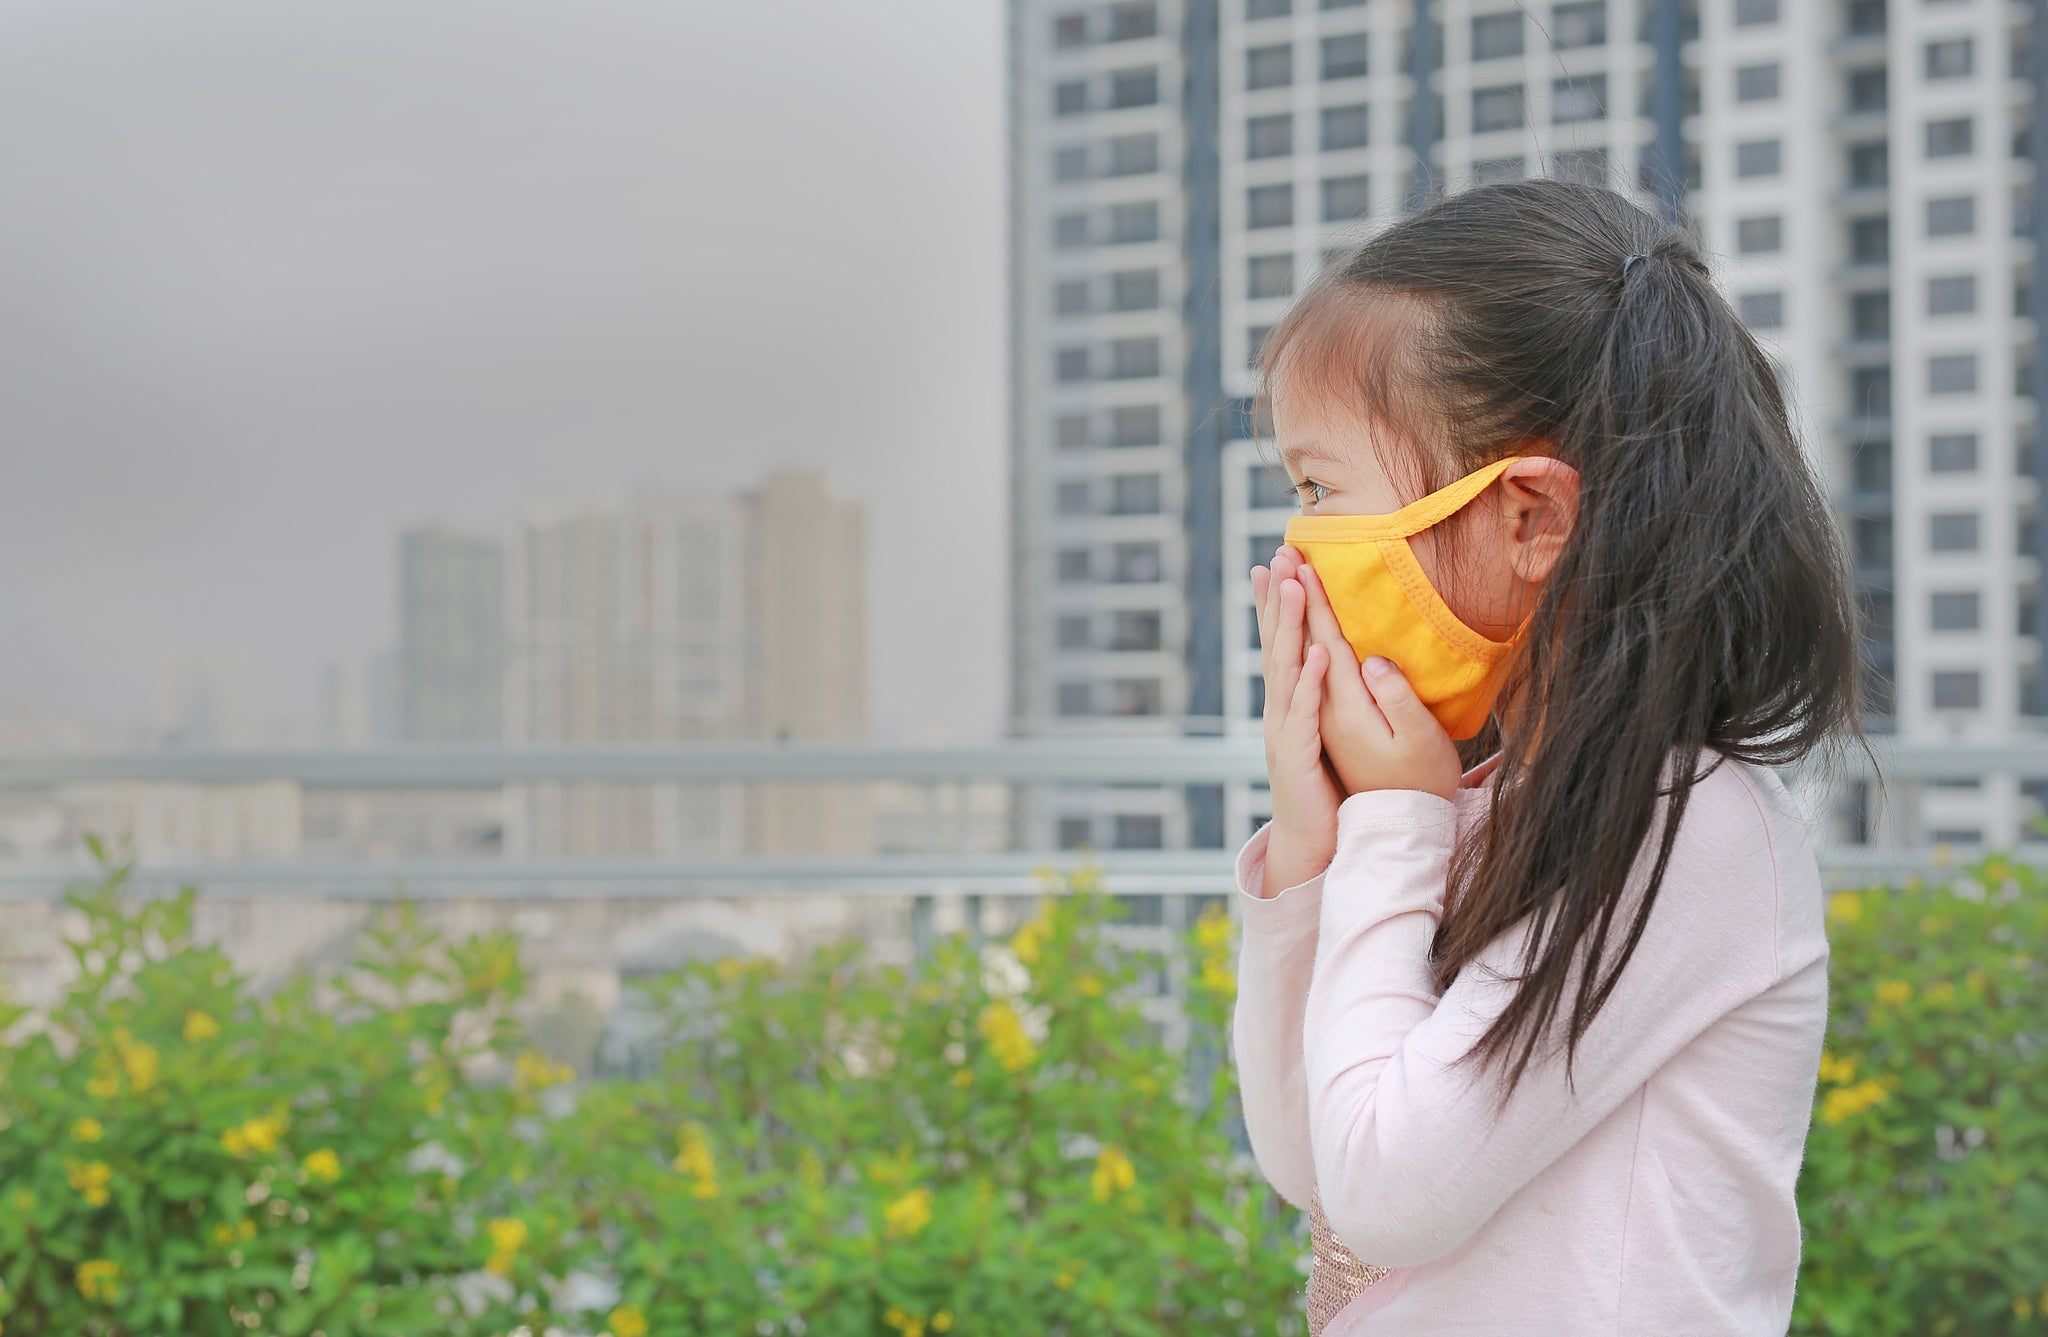 Why Children Need to Wear Air Pollution Masks